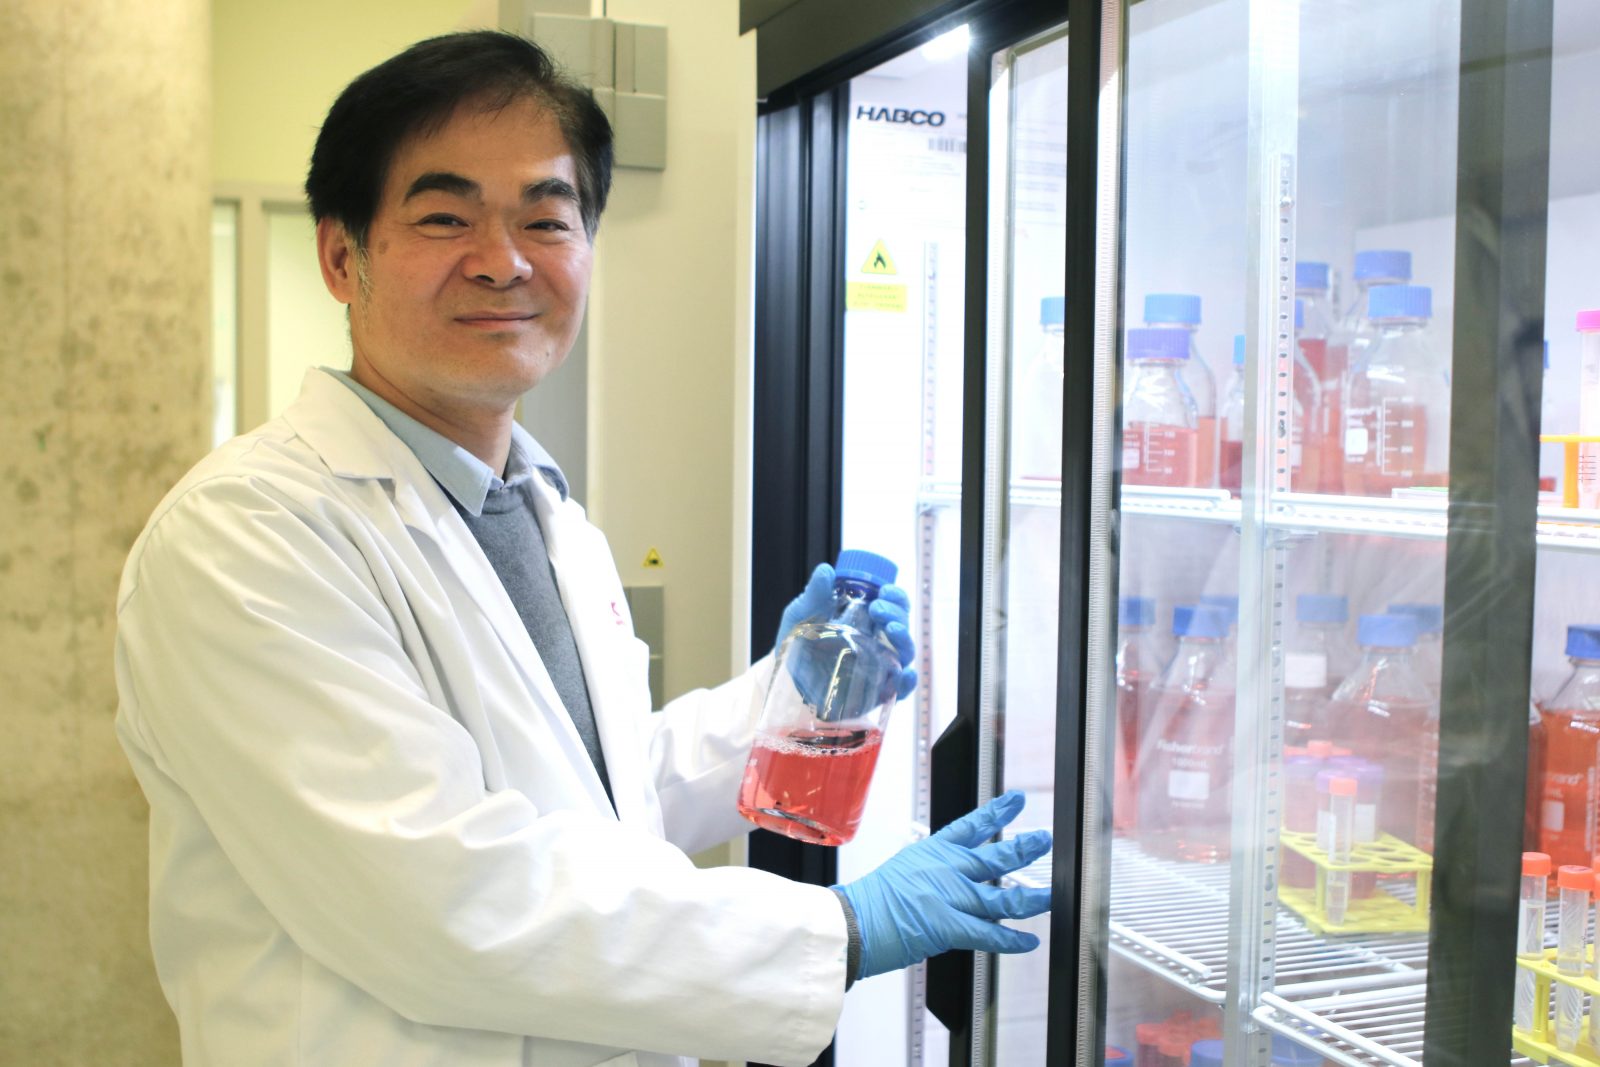 Newman Sze smiles into the camera as he stands next to a refrigerator in his lab.